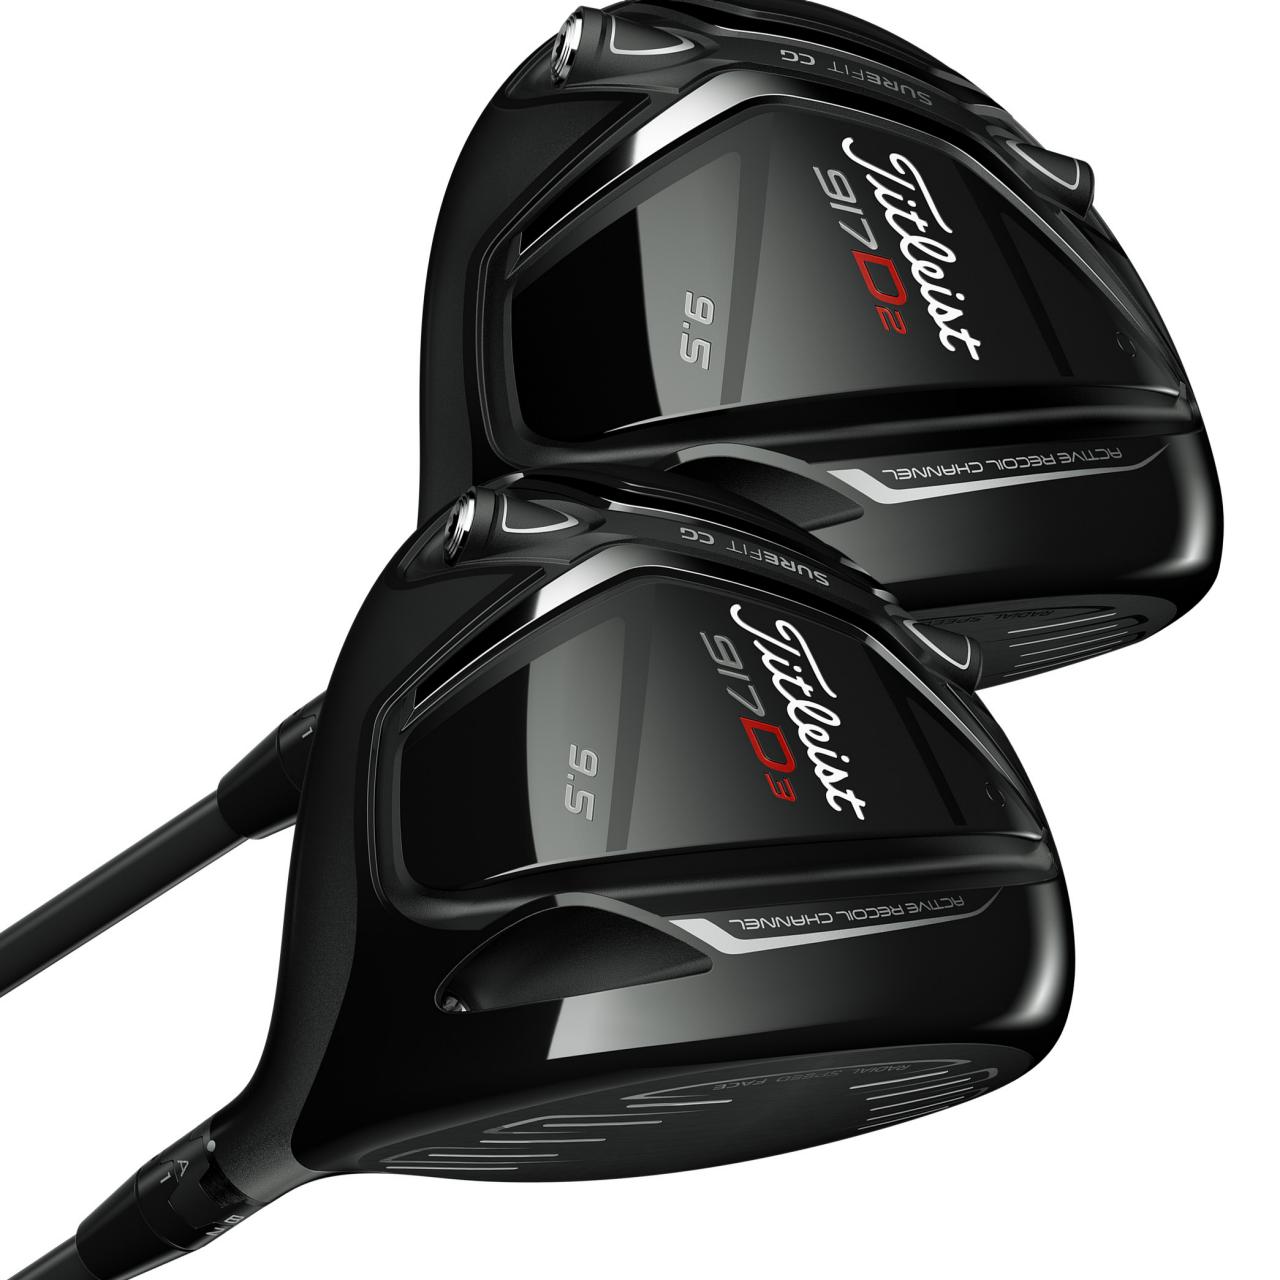 New Titleist 917 metalwoods add adjustable sole weight | This is